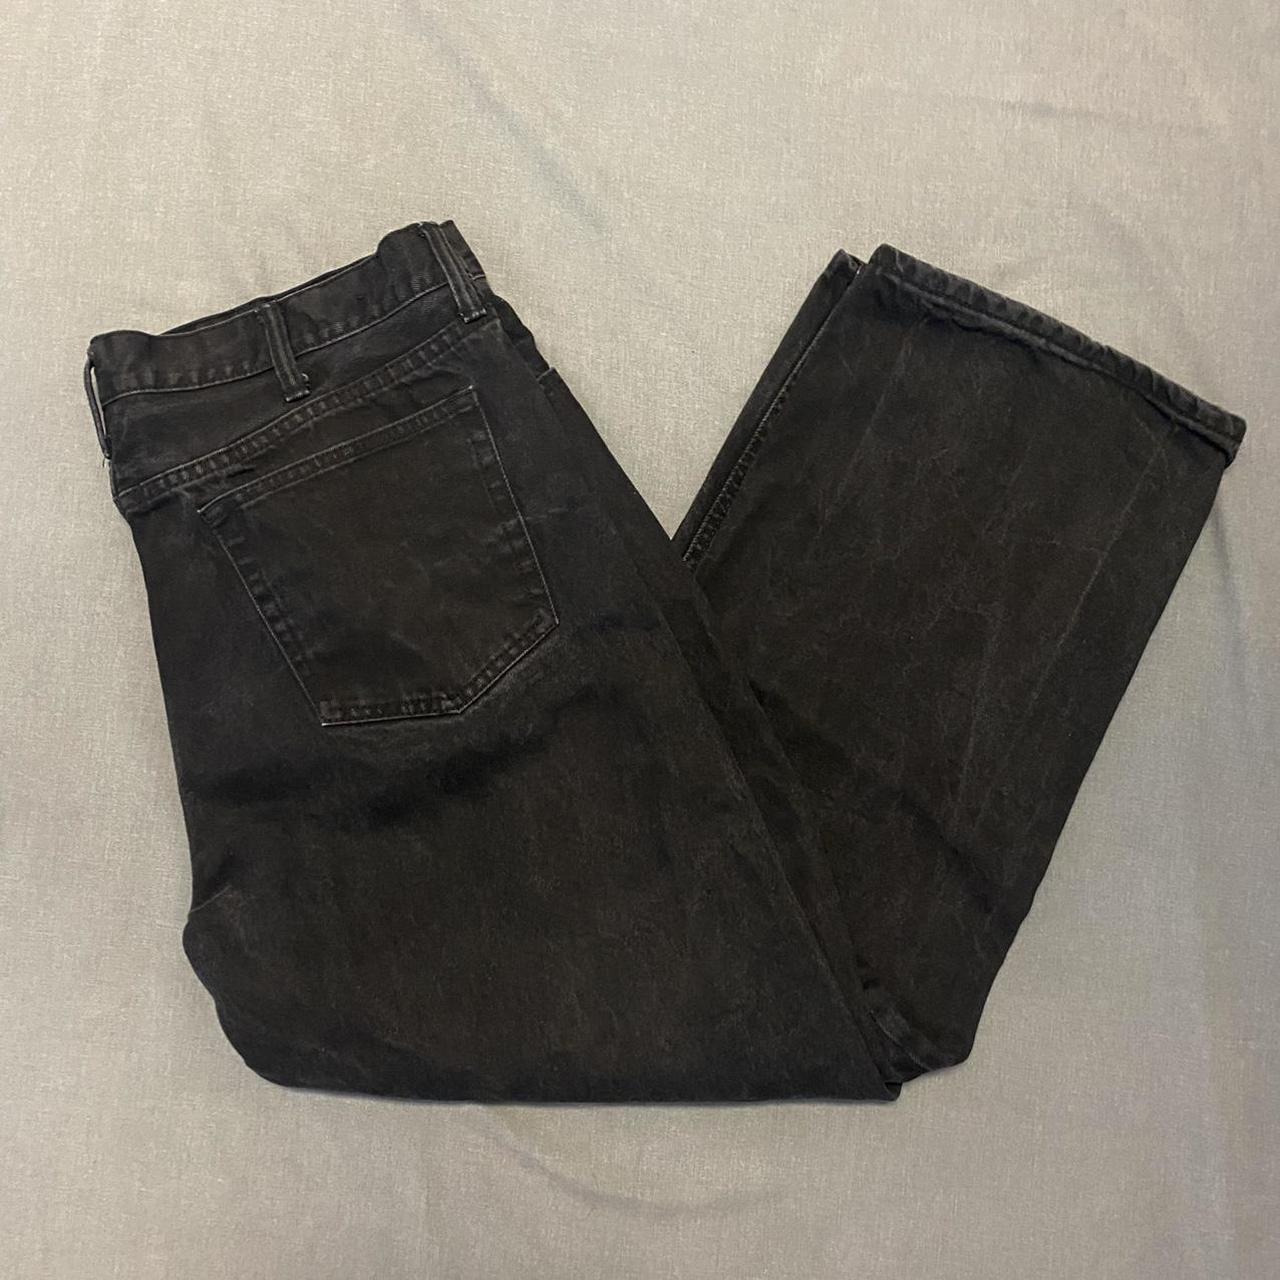 Accepting Offers 📲 - Baggy Basic Edition Jeans,... - Depop